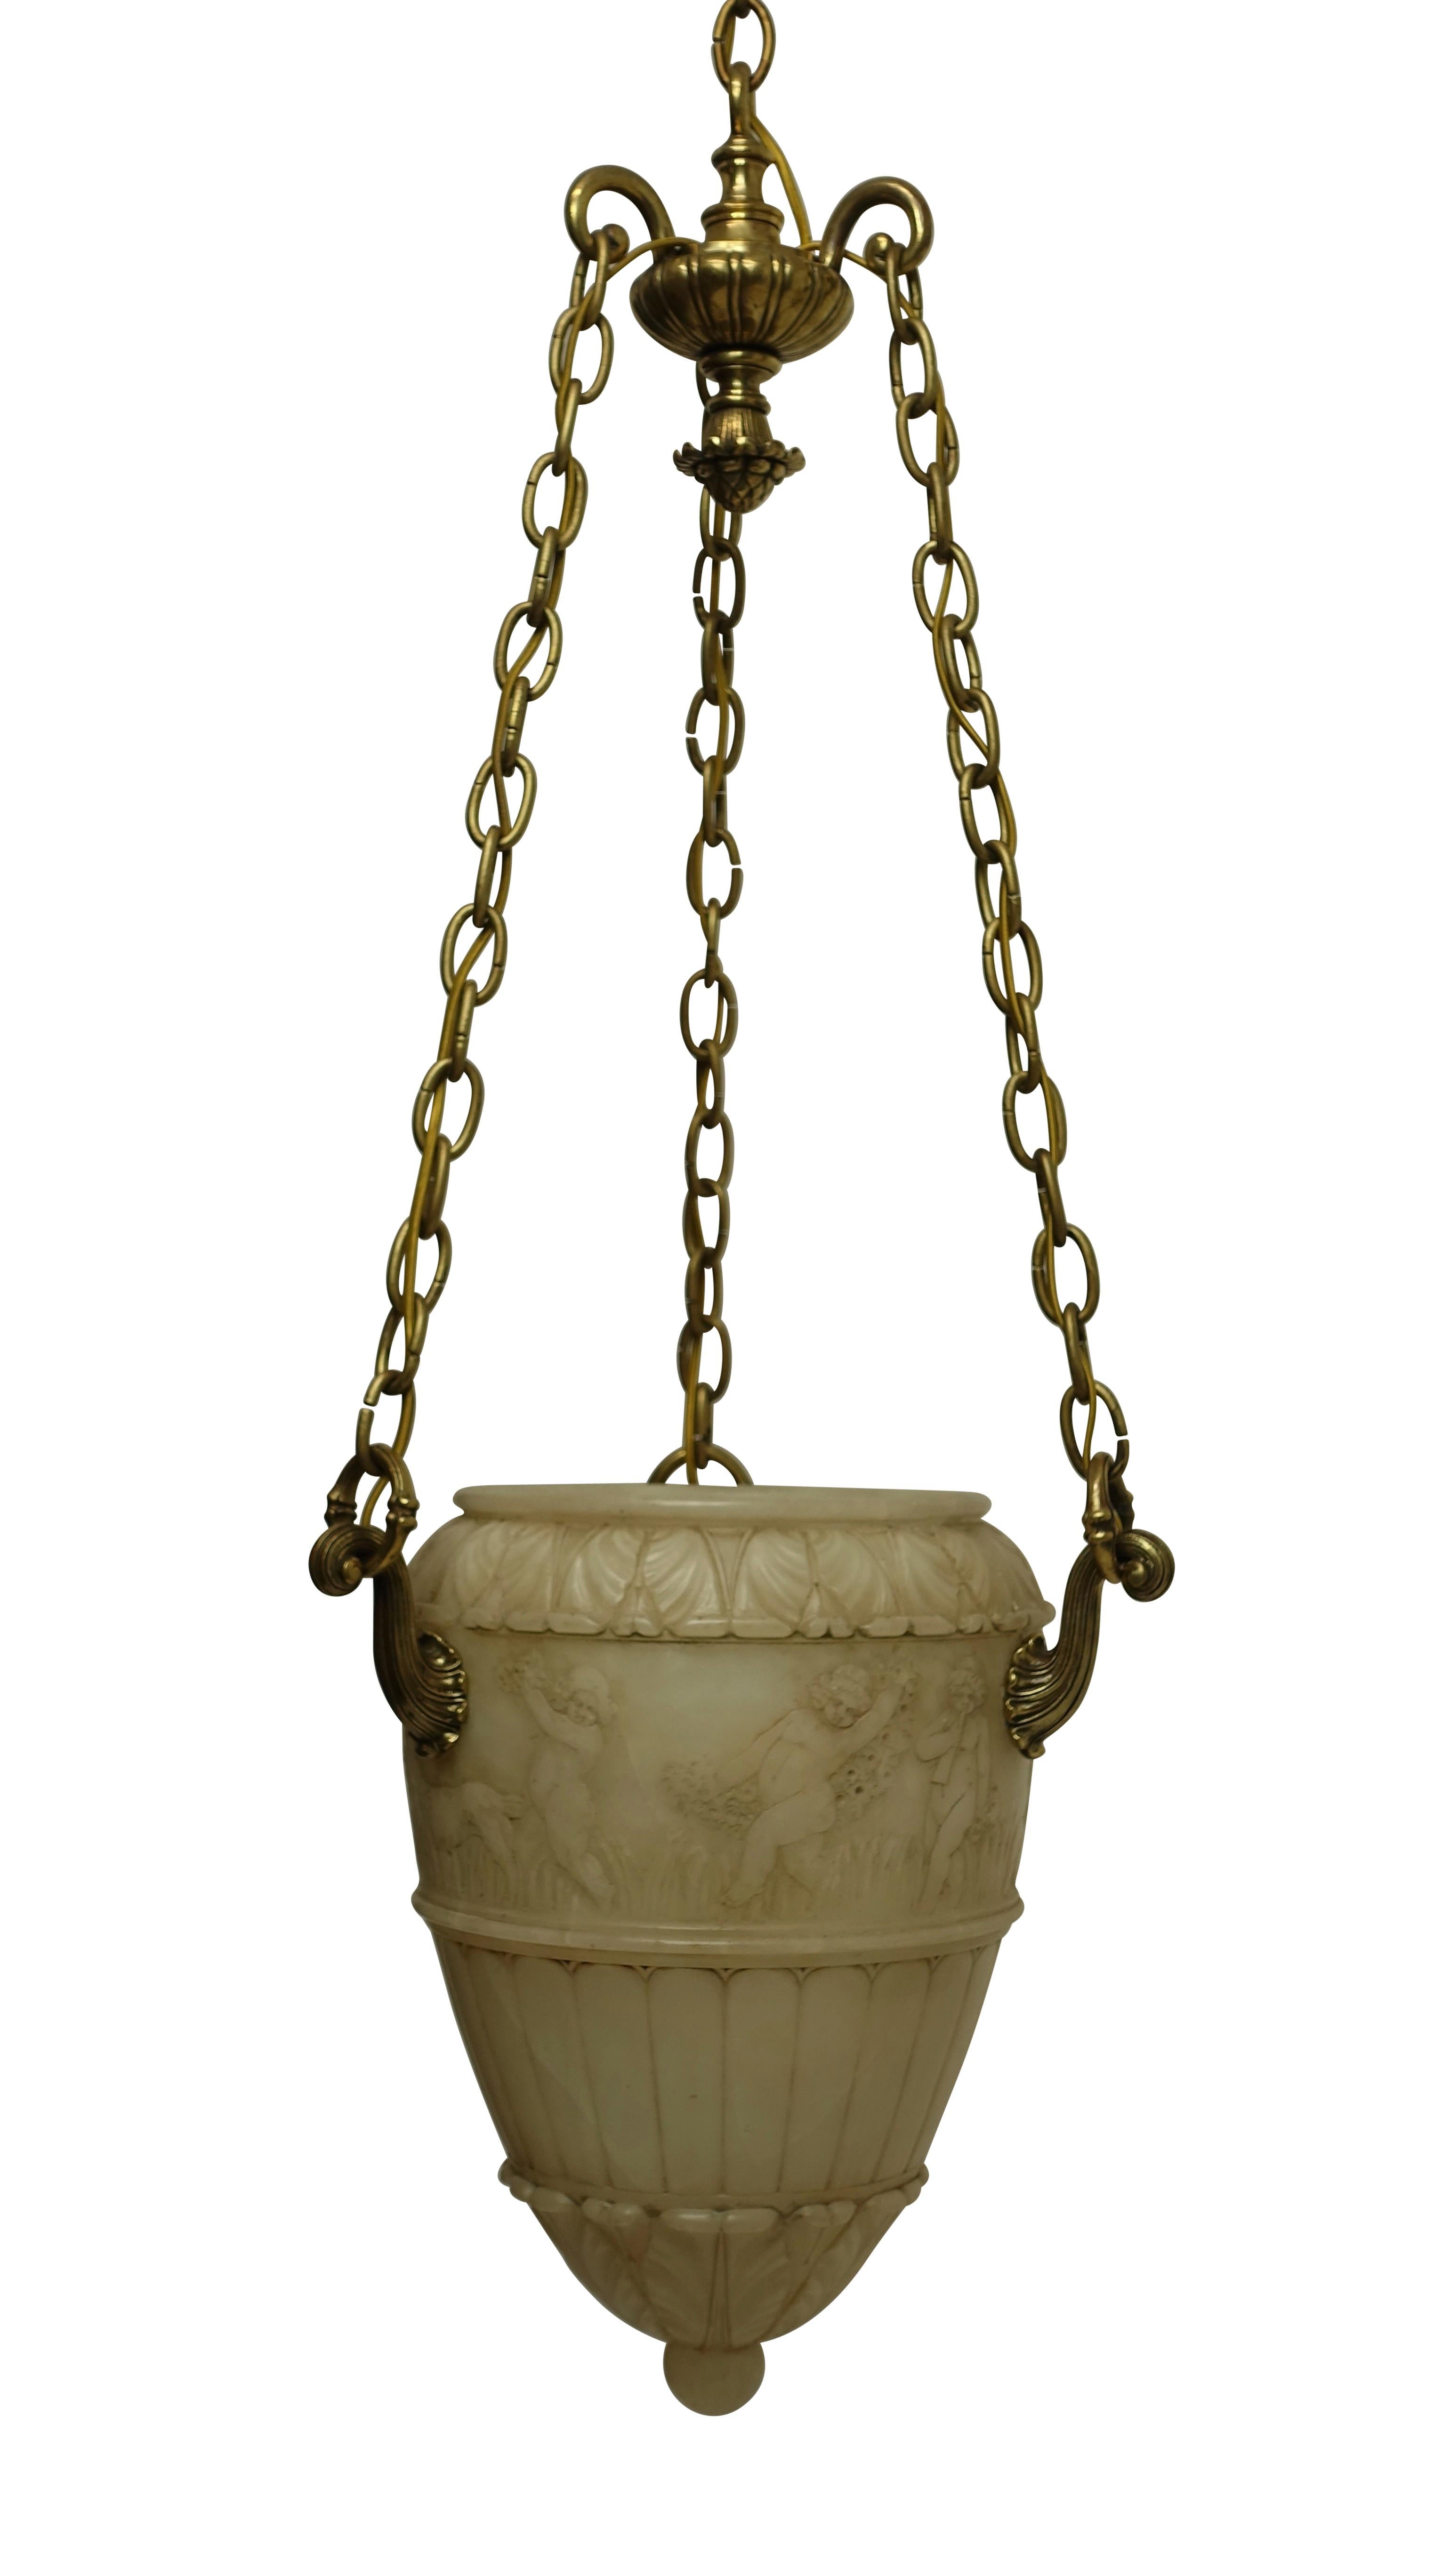 Neoclassical Carved Alabaster Pendant Light Fixture with Brass Hardware, Italian, circa 1910 For Sale